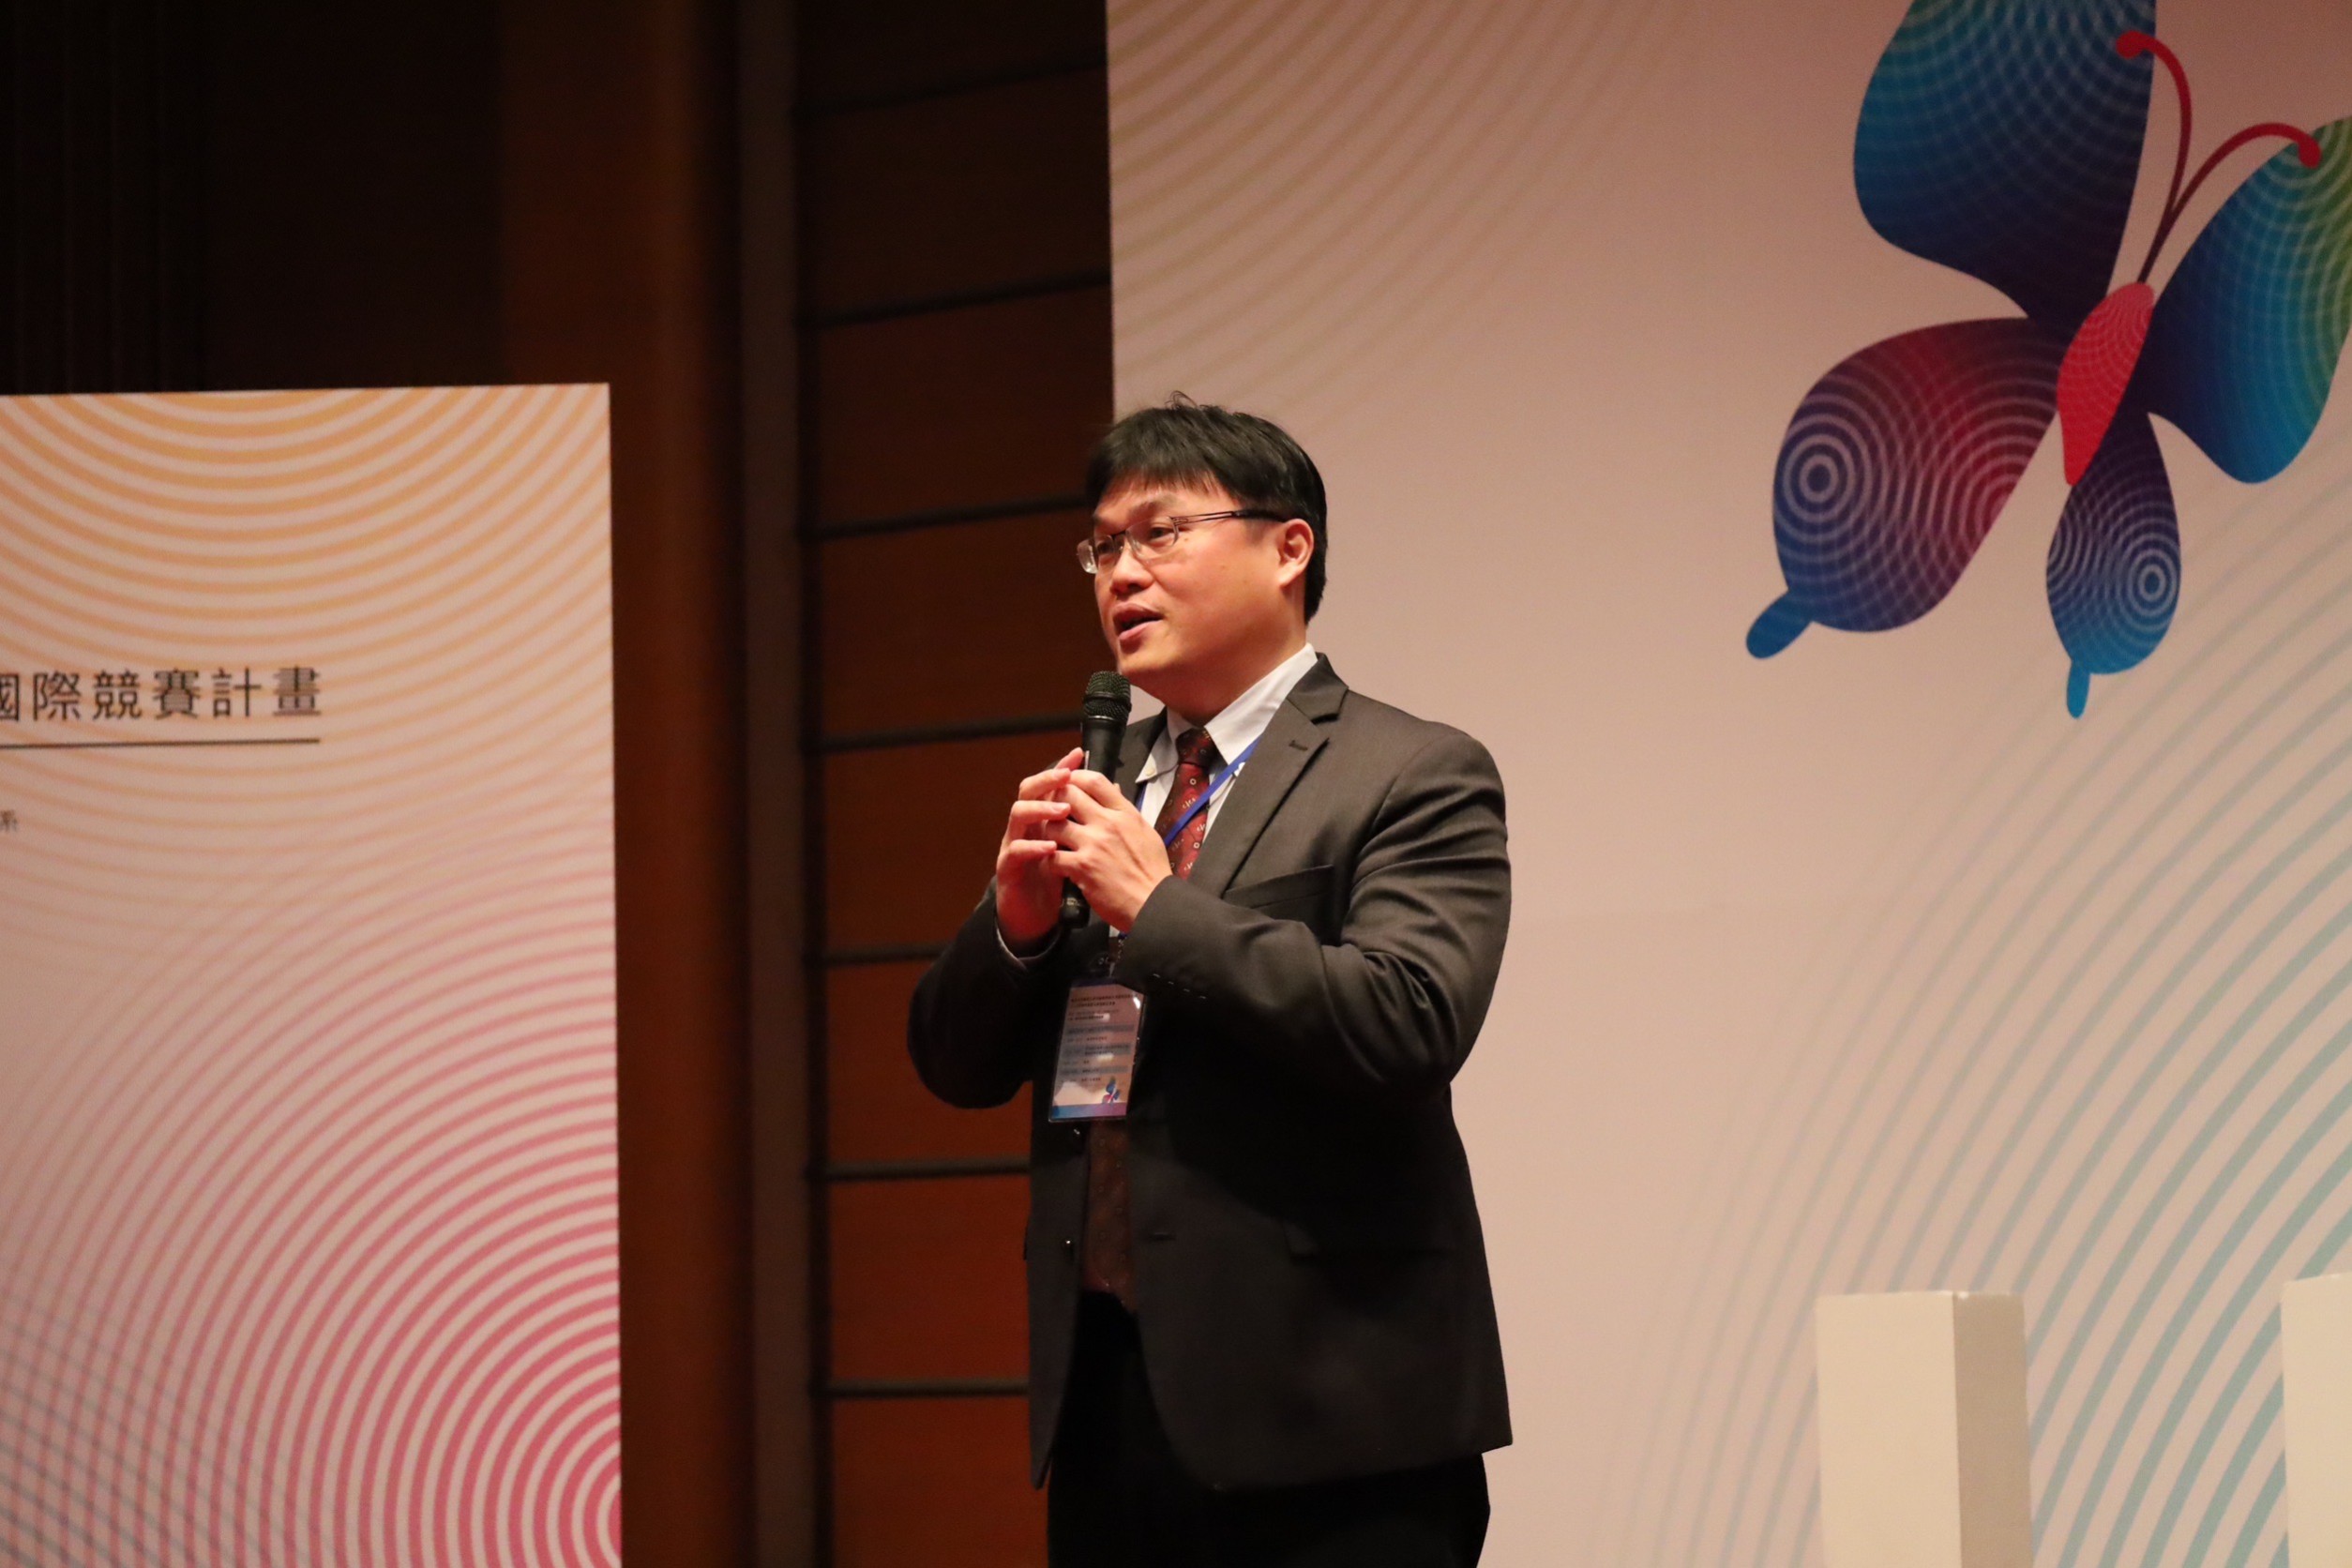 At the award ceremony, Director-General Jun-Zhang Zhu from the Department of Higher Education of the Ministry of Education delivered a speech, commending Taiwan's students for the vibrant development of creative design energies